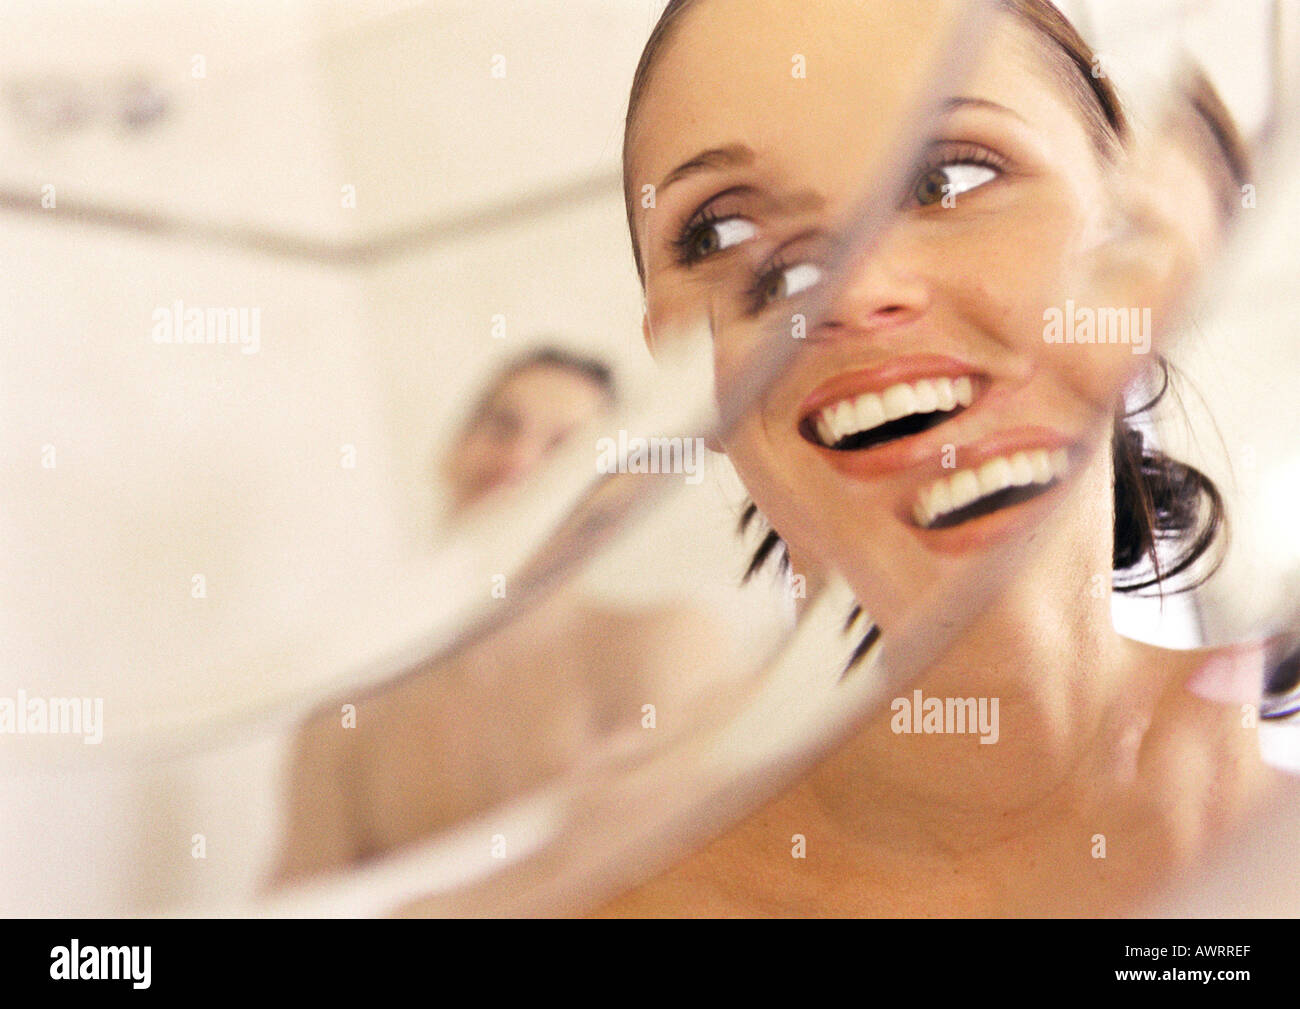 Woman looking at man in mirror, close-up, smiling, distortion Stock Photo